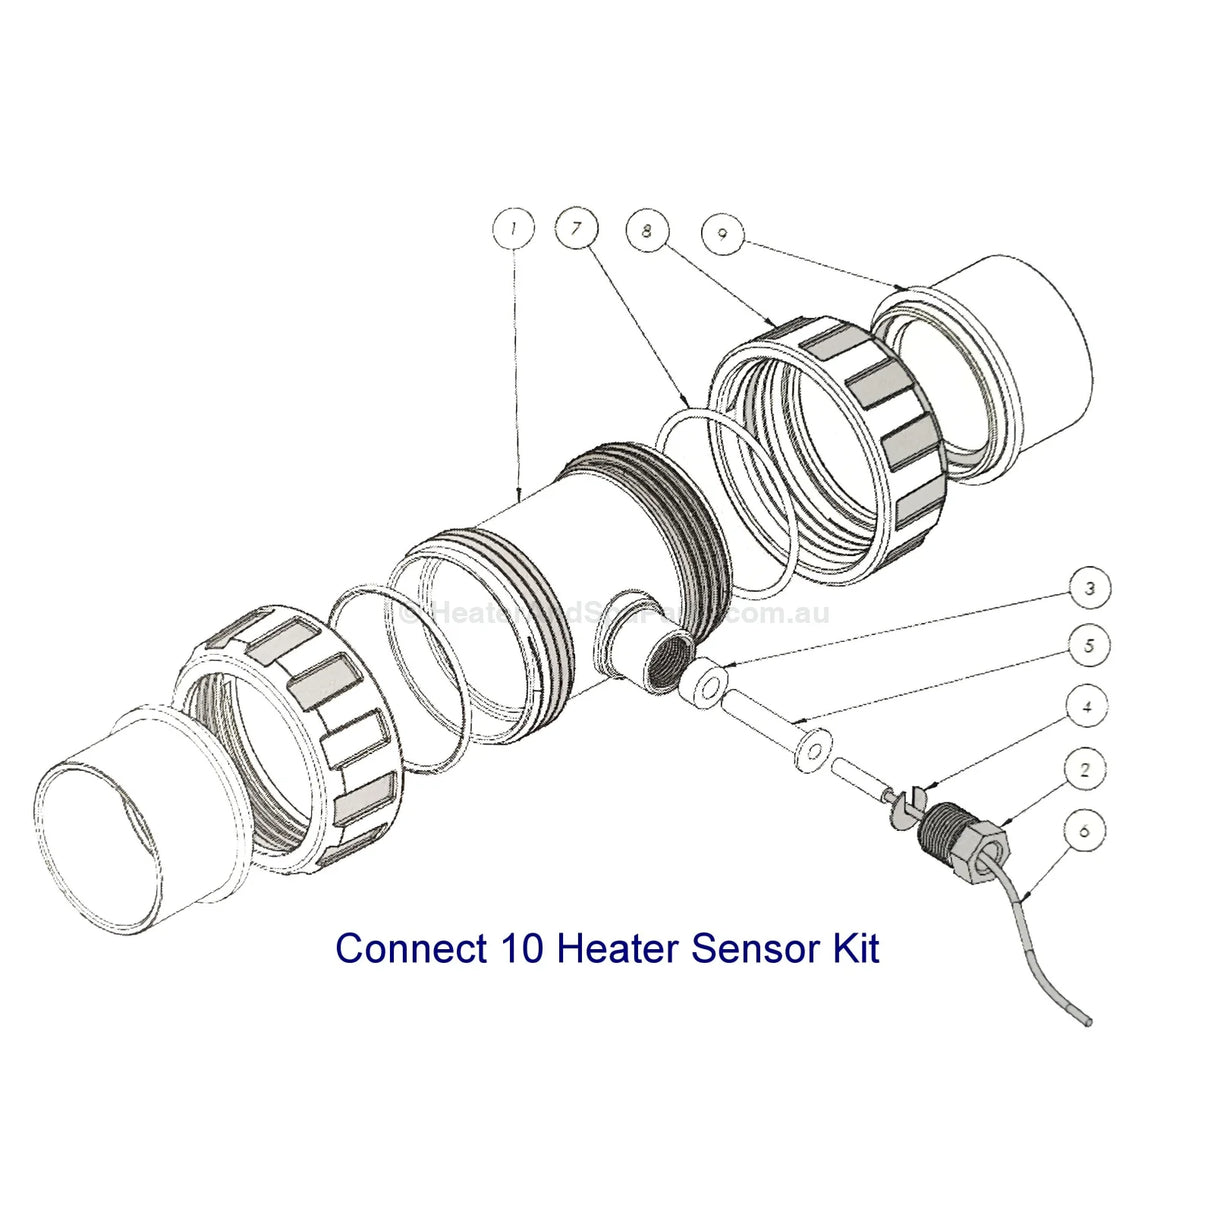 Connect 10 Heater Sensor Kit and Solar Sensor Kit - For Heat Pumps & non-Astral Gas Heaters - Heater and Spa Parts